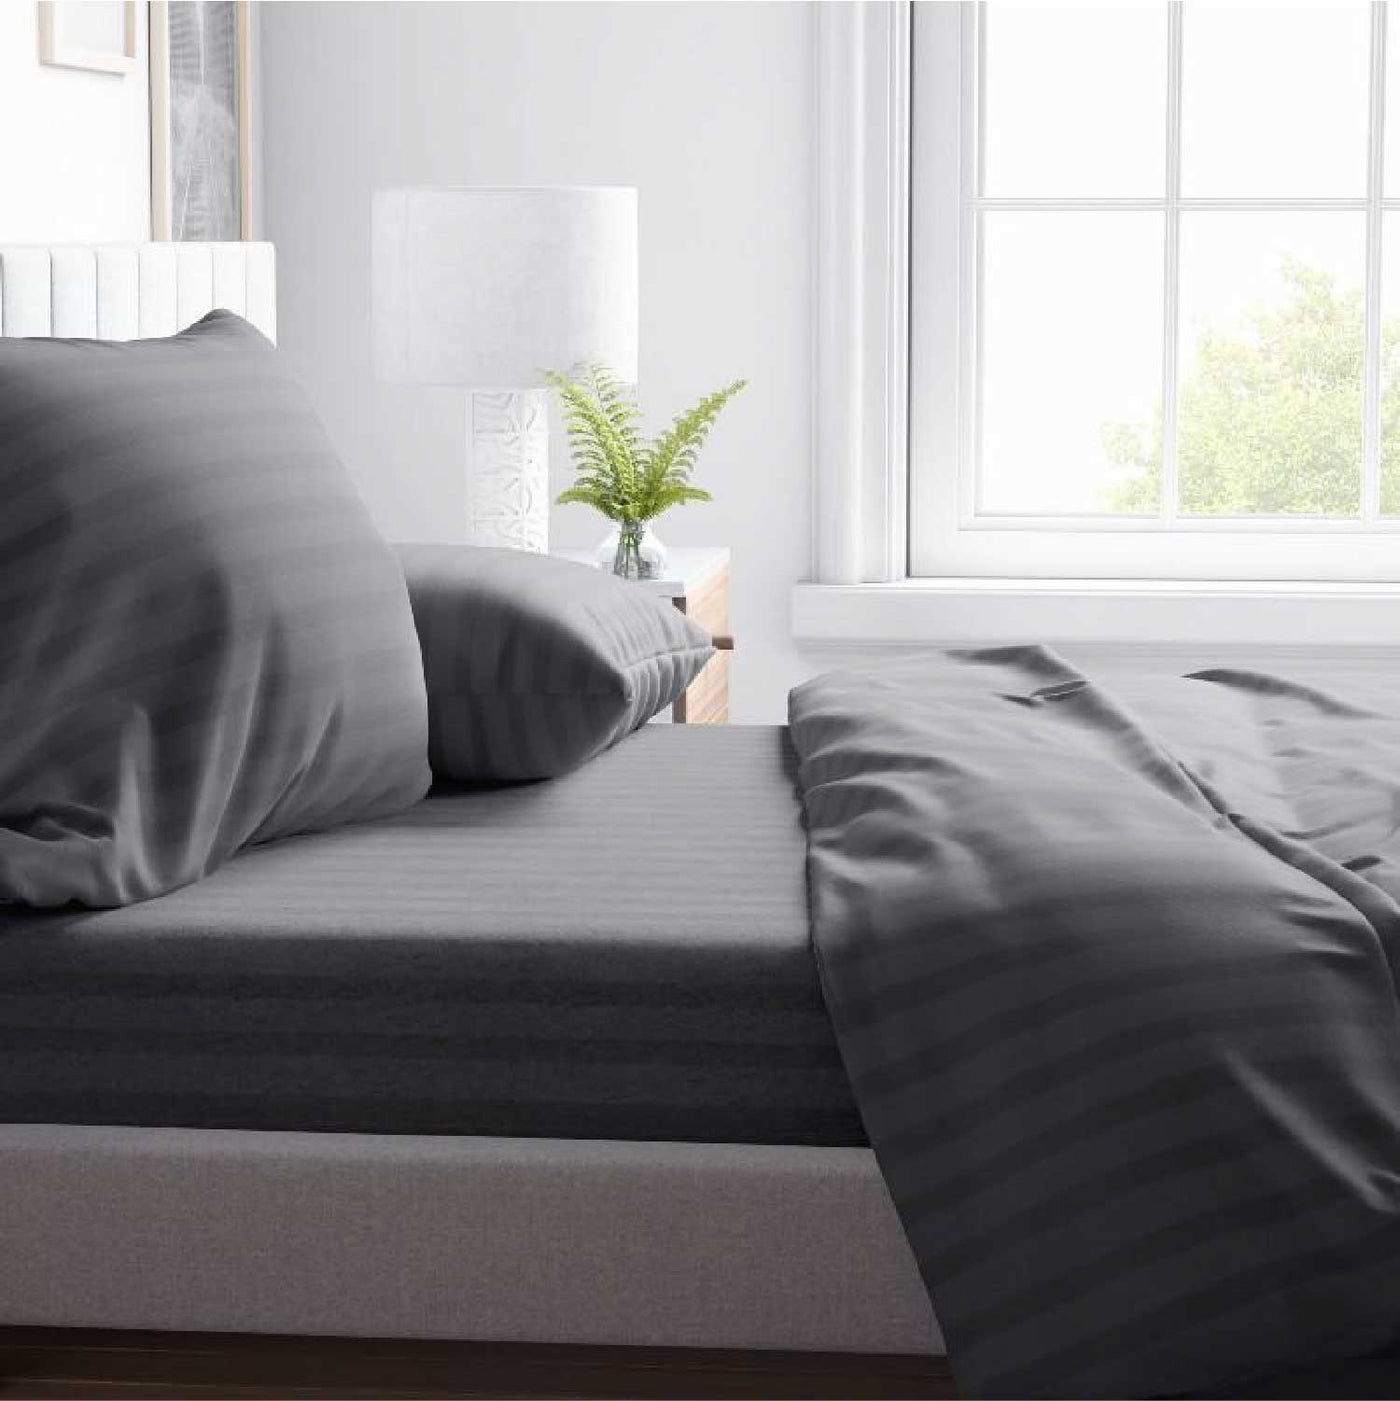 Striped 300 TC Egyptian Cotton Fitted Bed Sheet Set - Grey